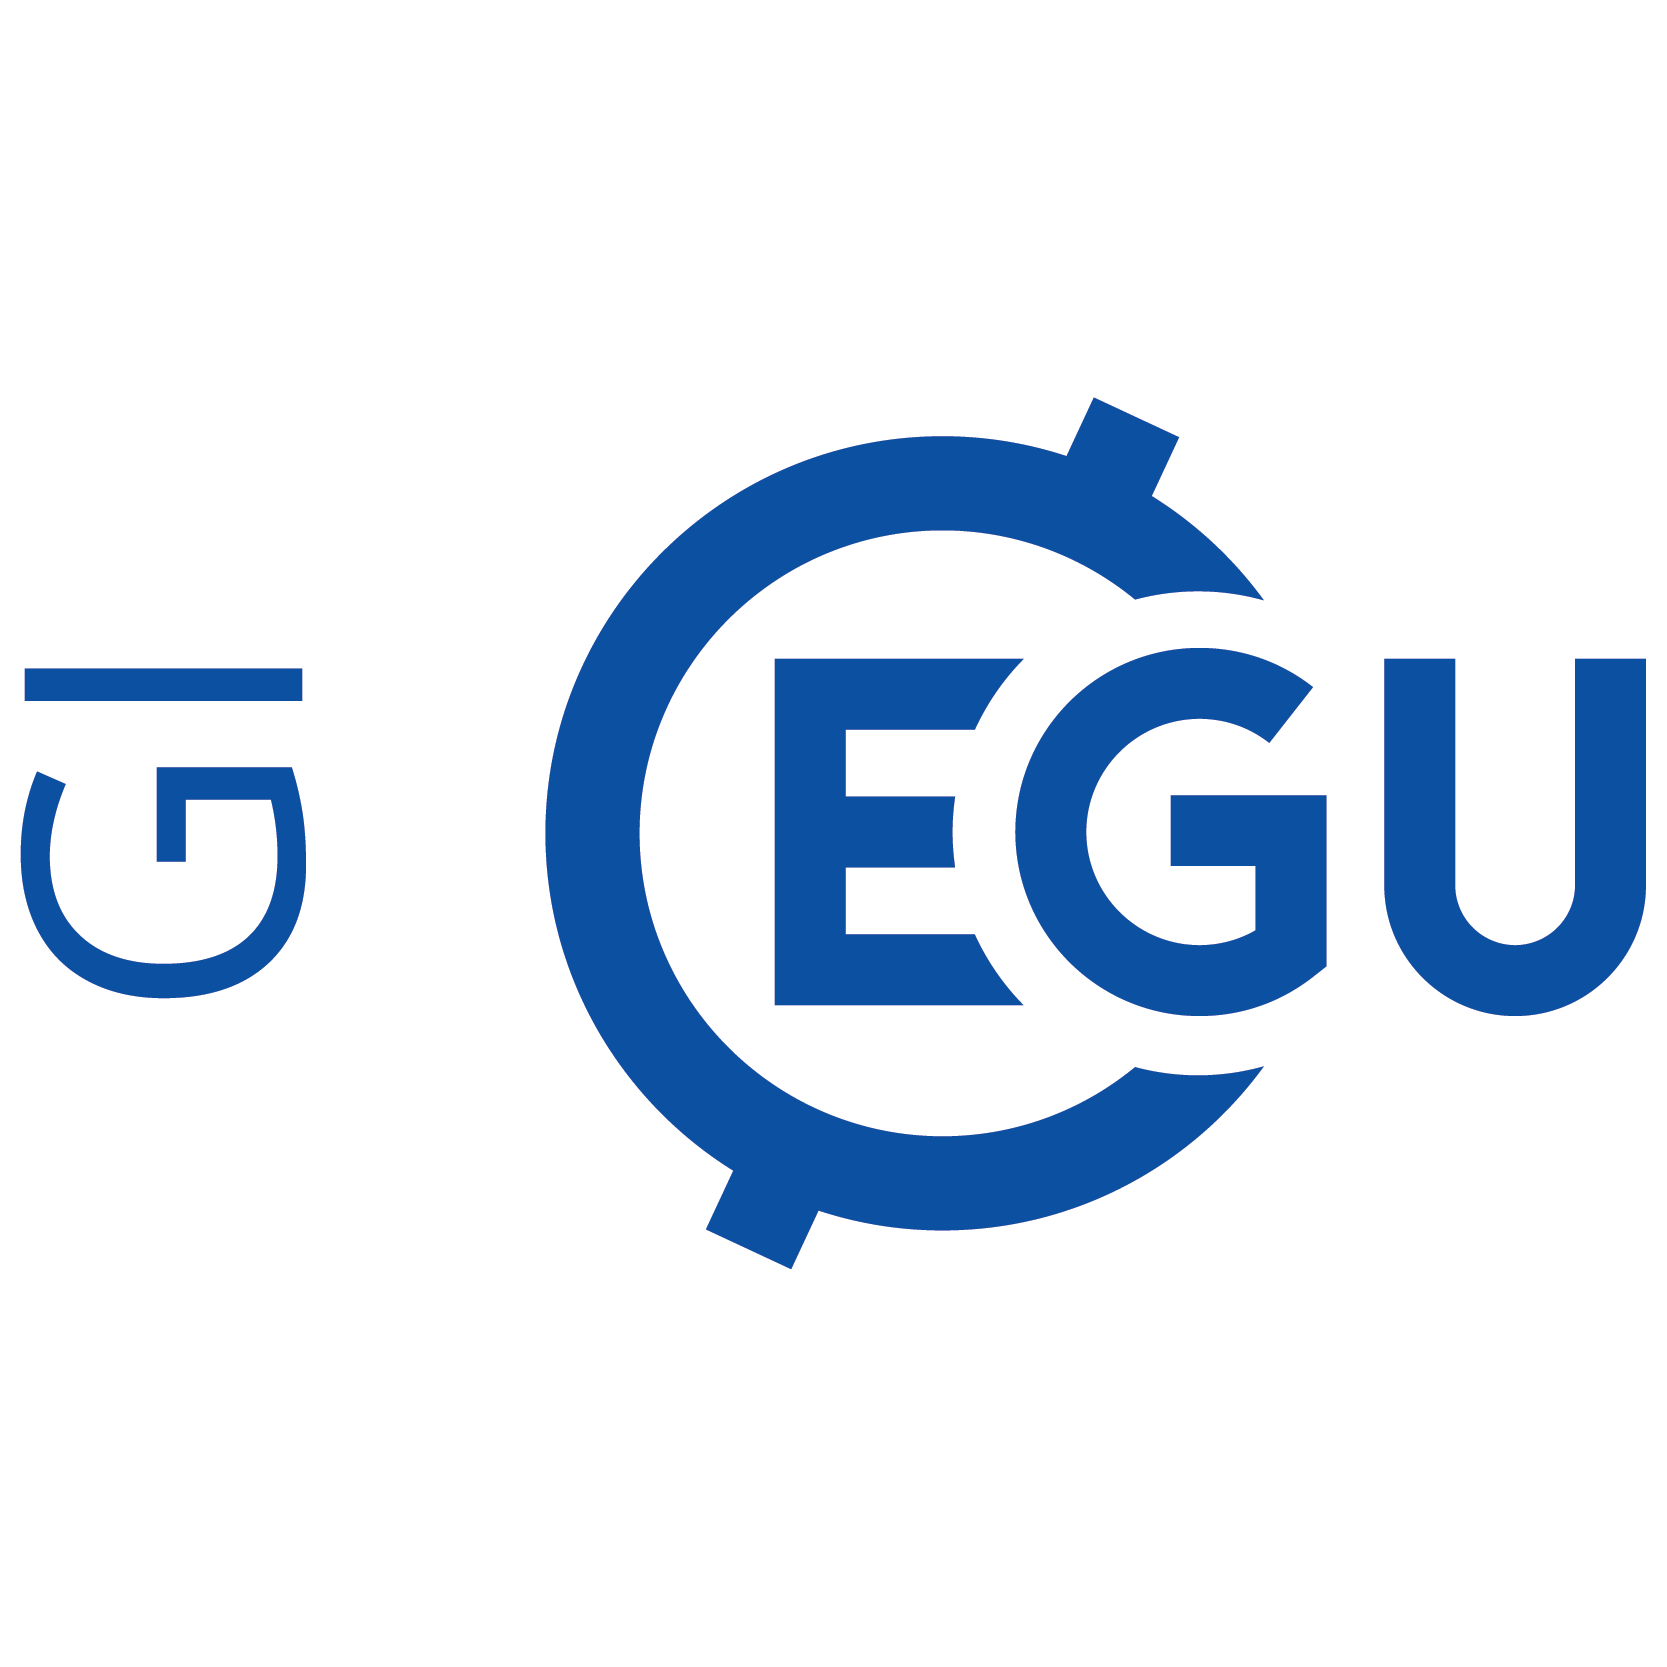 The Geosciences Instrumentation and Data Systems (GI) division of EGU focuses on innovative geoscientific instrumentation, techniques and data handling methods.